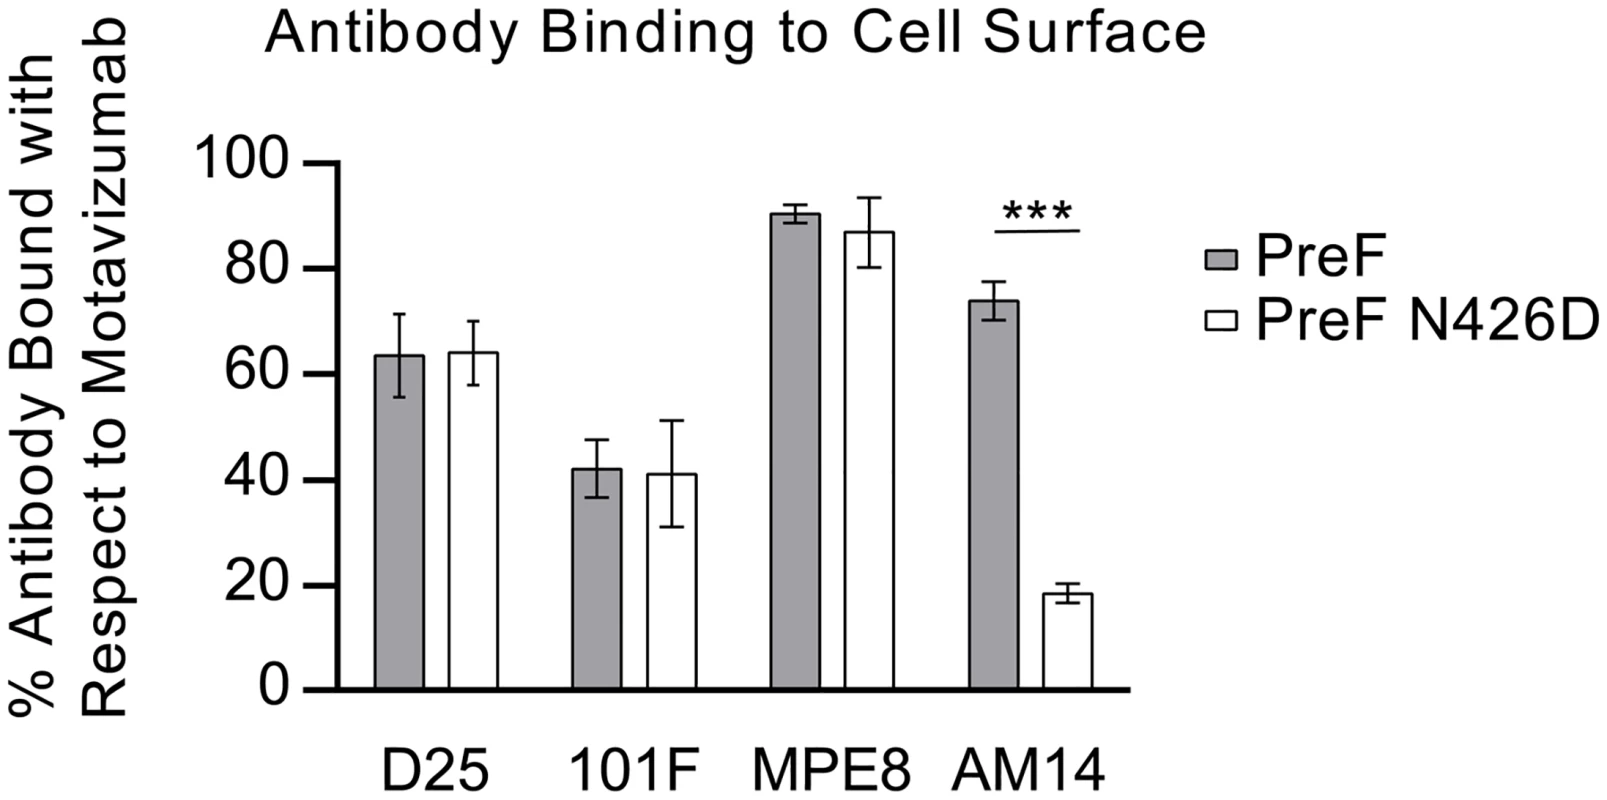 N426D disrupts binding of AM14 to prefusion F.